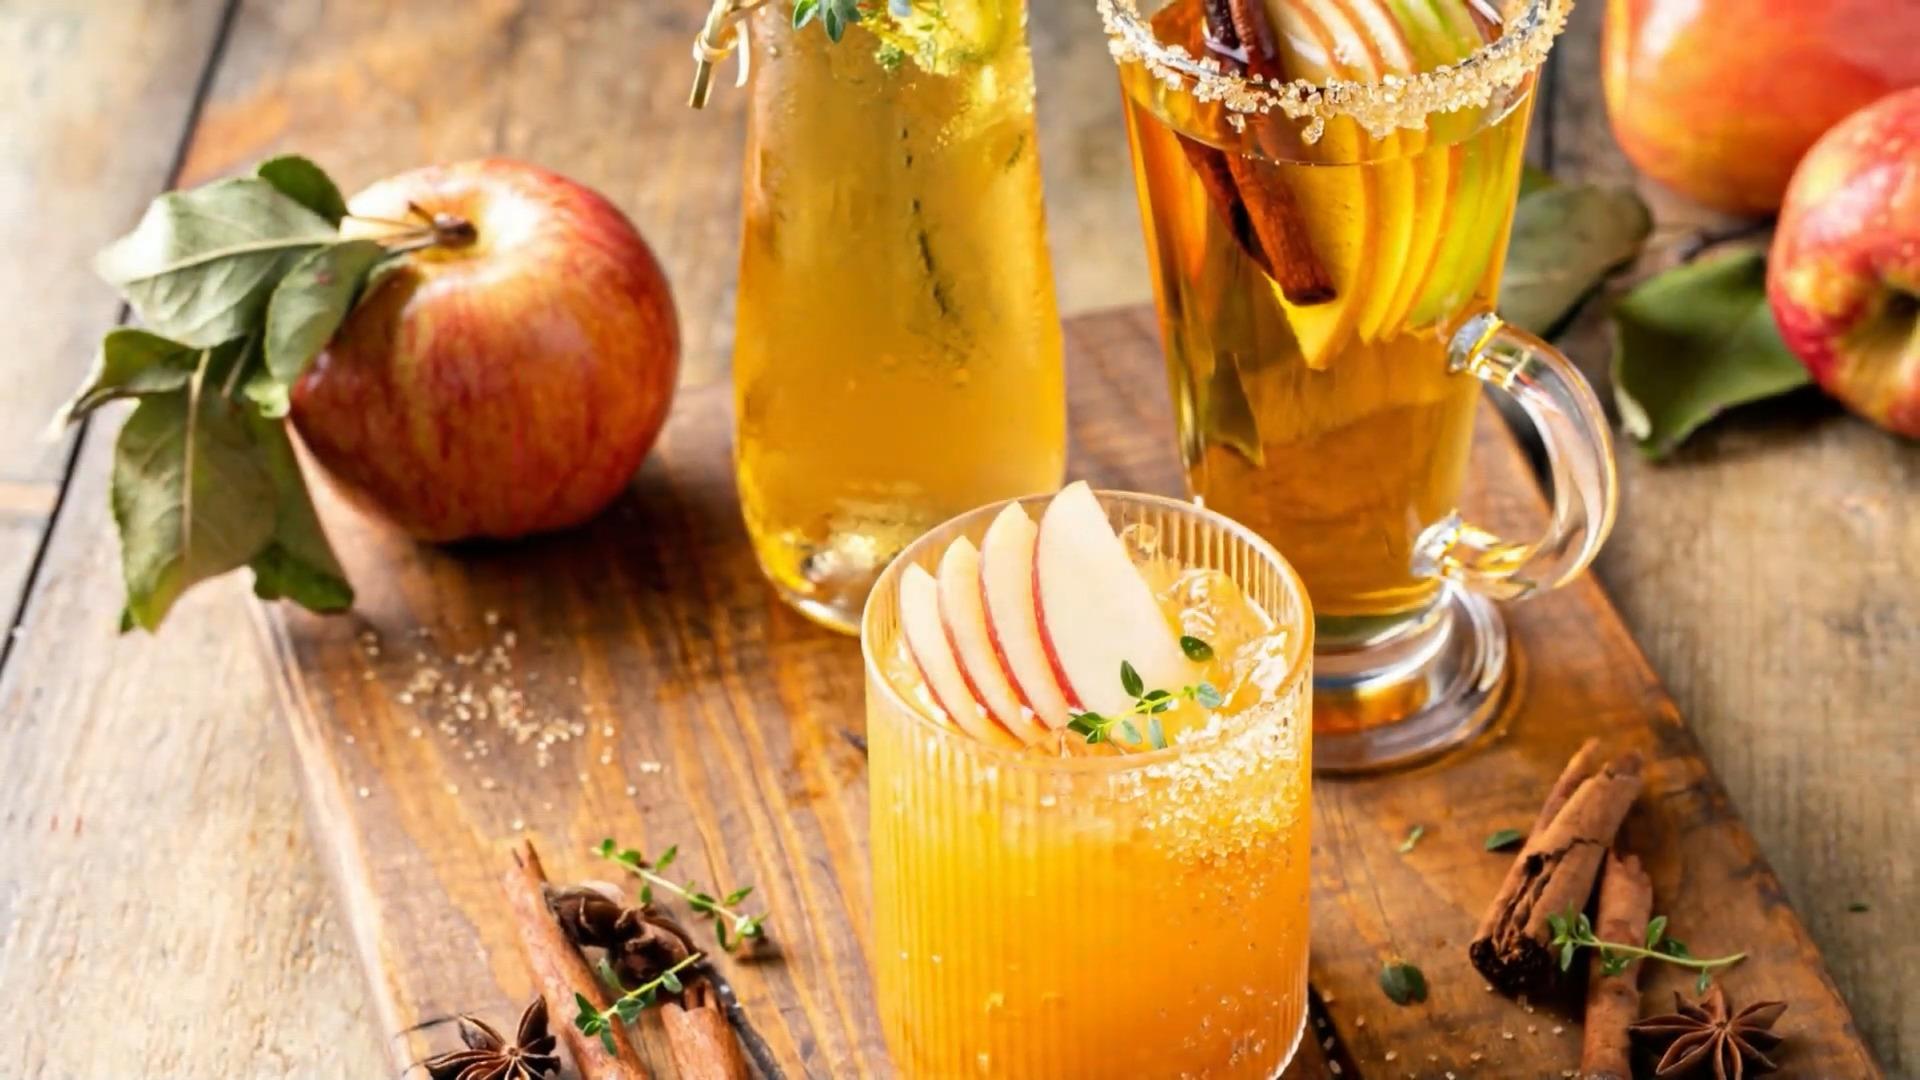 Gin Cider Punch: This drink heats up The holidays can come